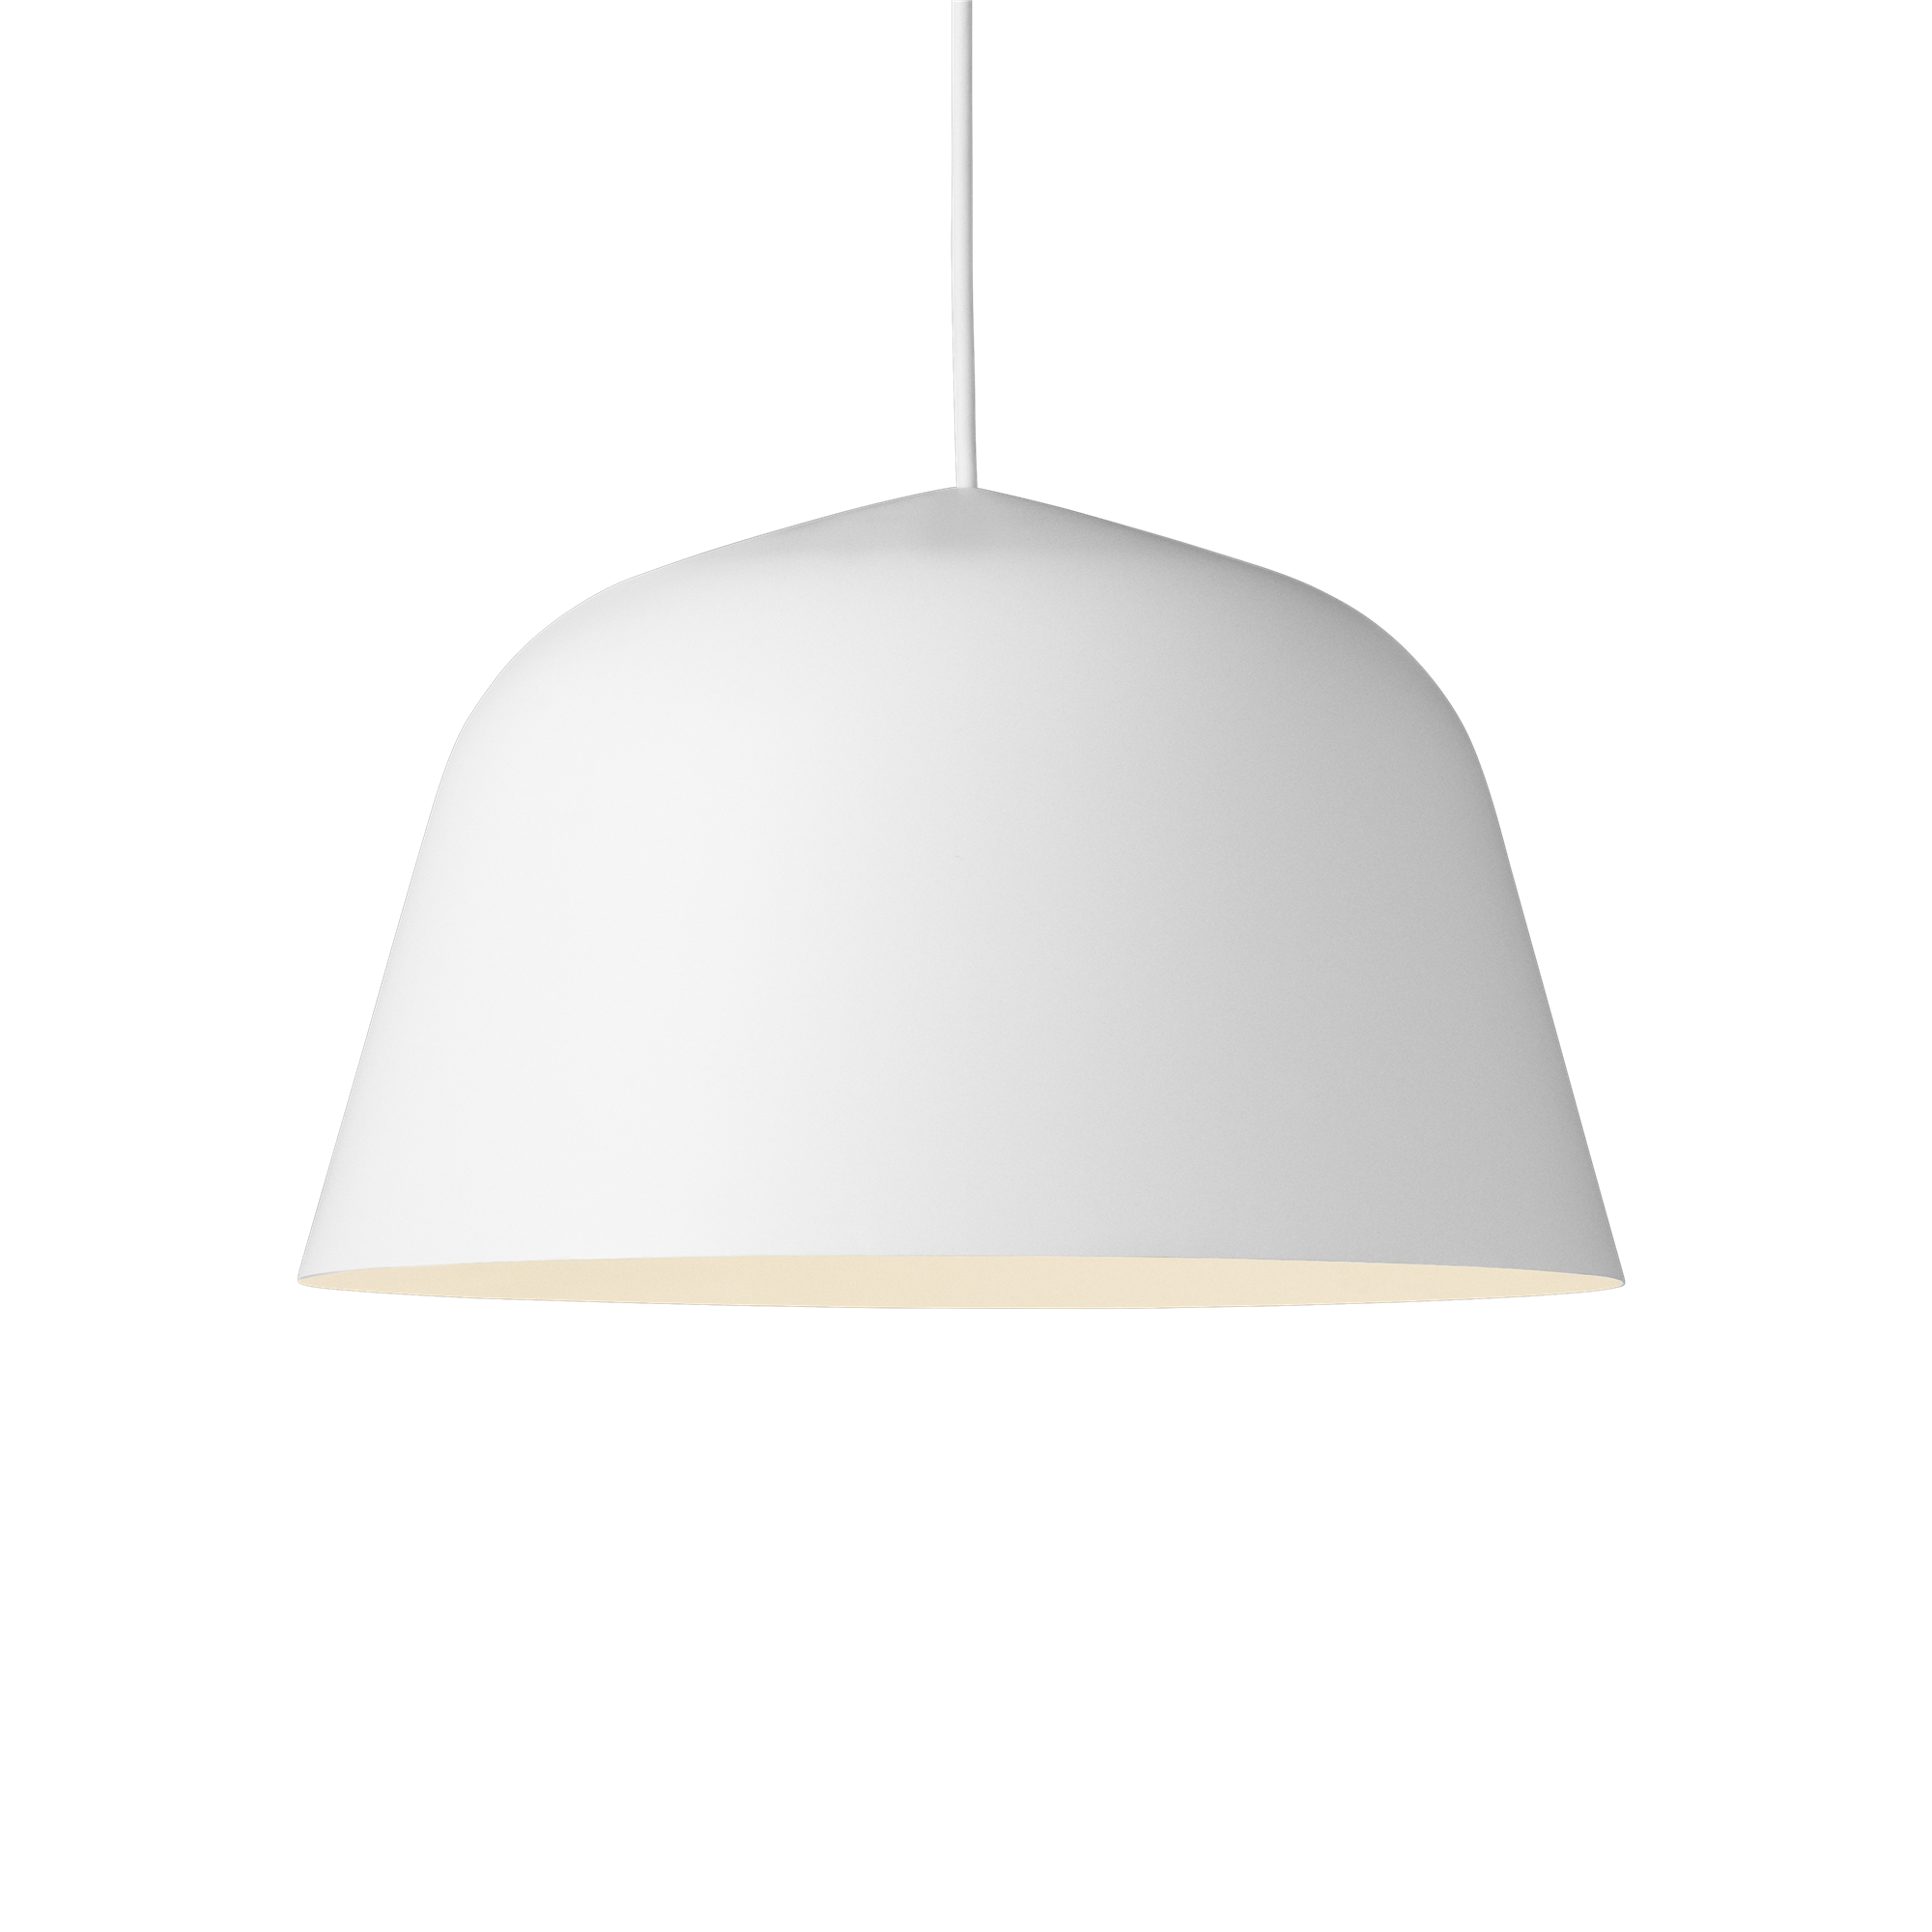 White Ceiling Lamp PNG Image